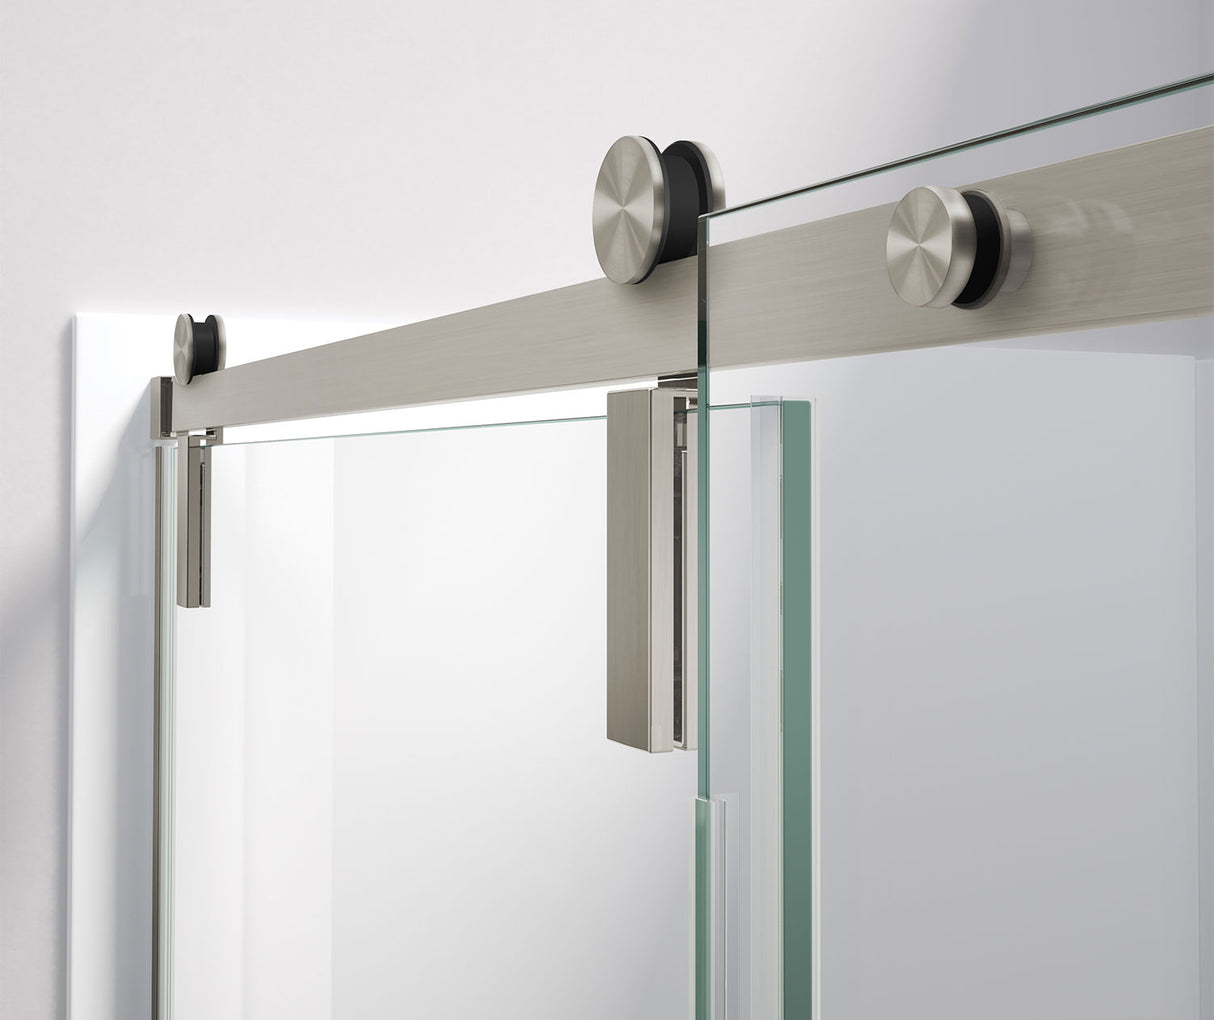 MAAX 135875-900-305-000 Nebula 56 ½-58 ½ x 78 ¾ in. 8mm Sliding Shower Door for Alcove Installation with Clear glass in Brushed Nickel